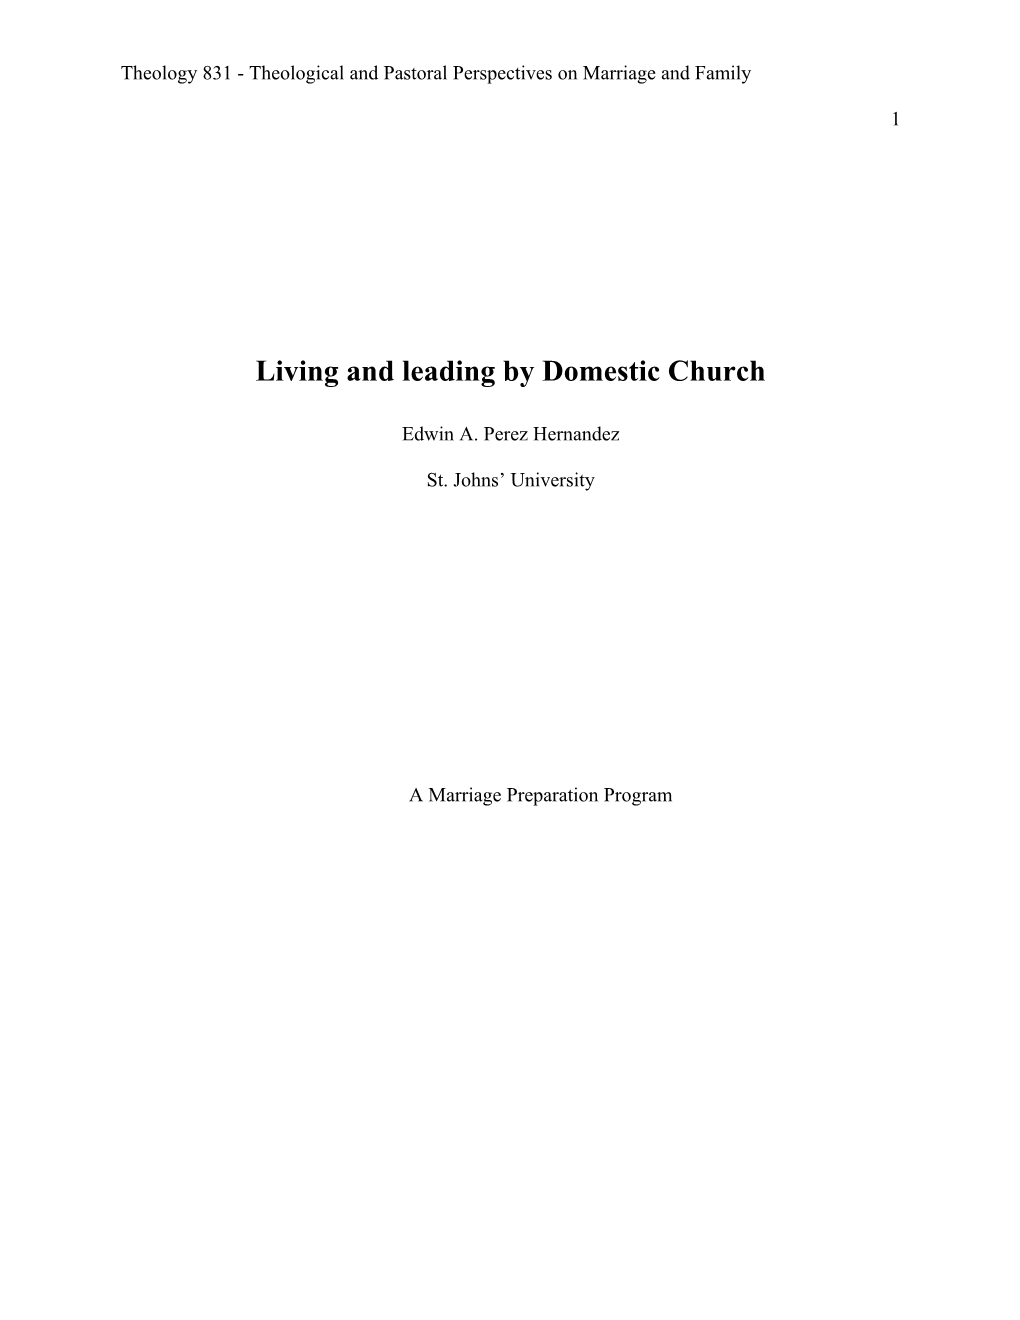 Living and Leading by Domestic Church